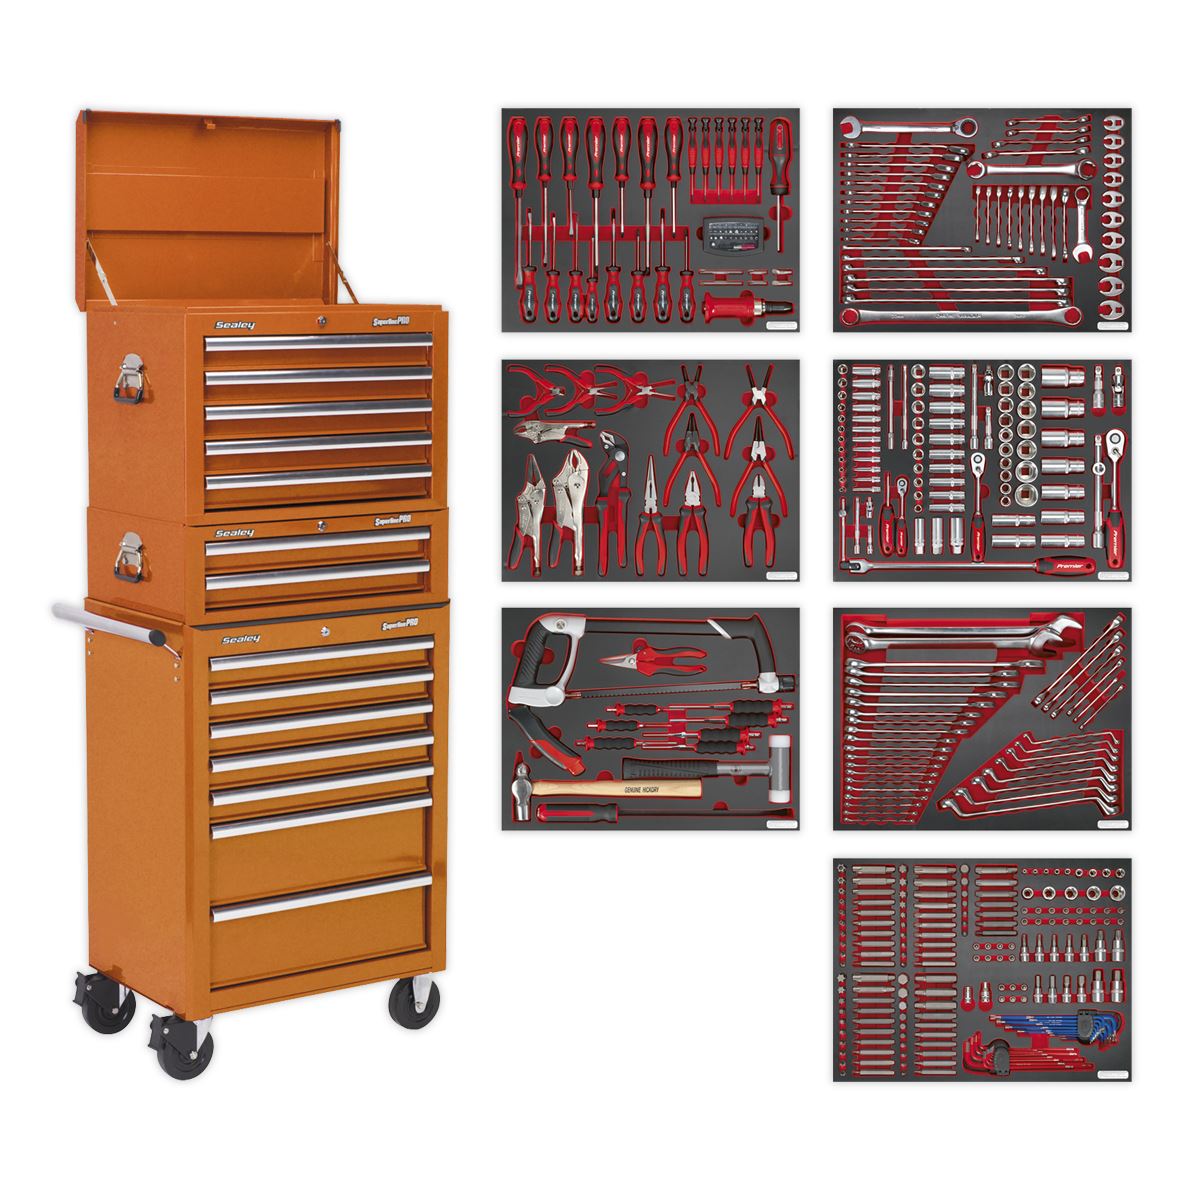 Sealey Superline Pro Tool Chest Combination 14 Drawer with Ball-Bearing Slides - Orange & 446pc Tool Kit